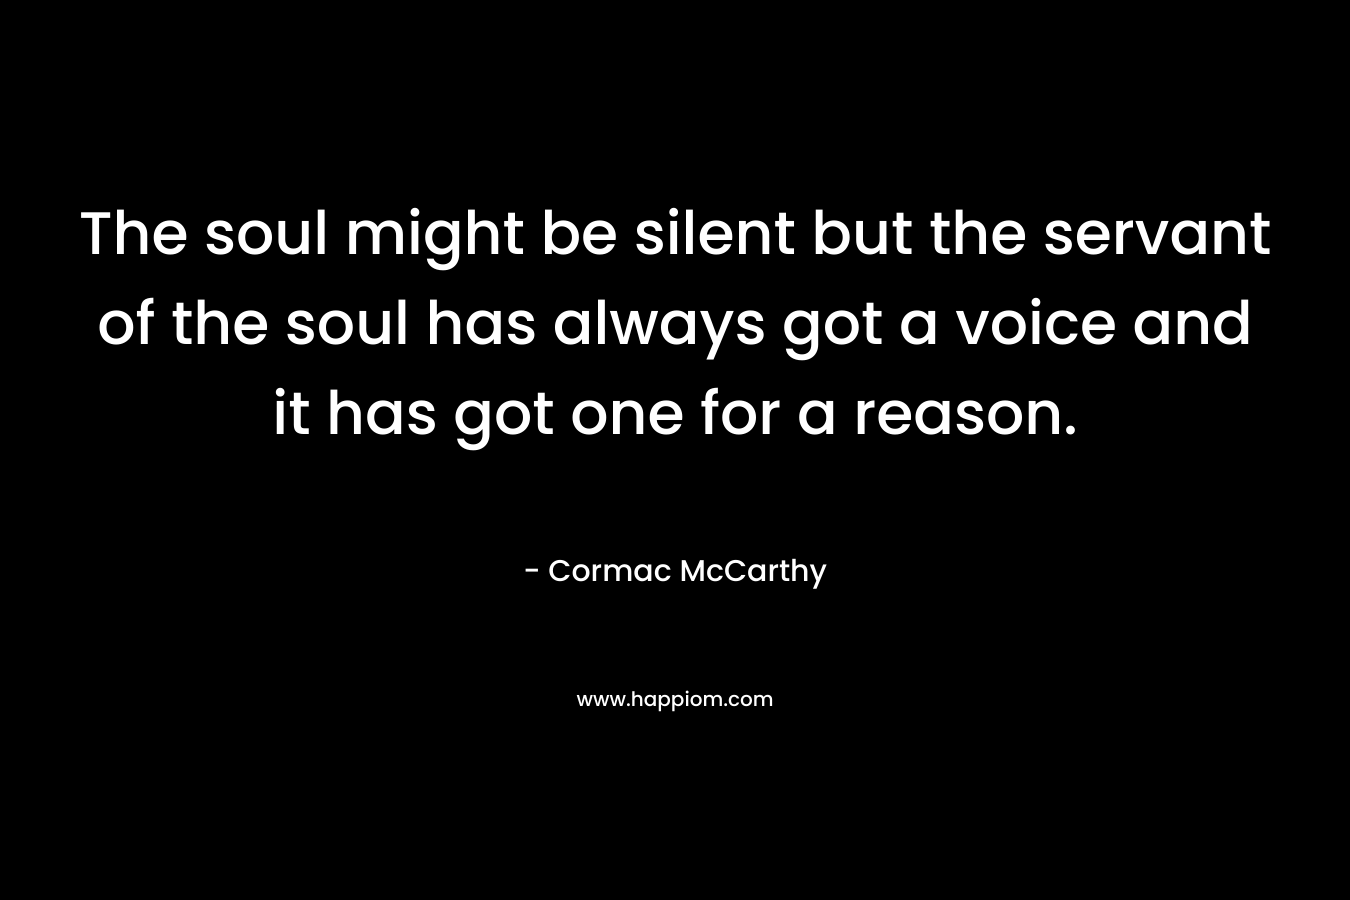 The soul might be silent but the servant of the soul has always got a voice and it has got one for a reason.